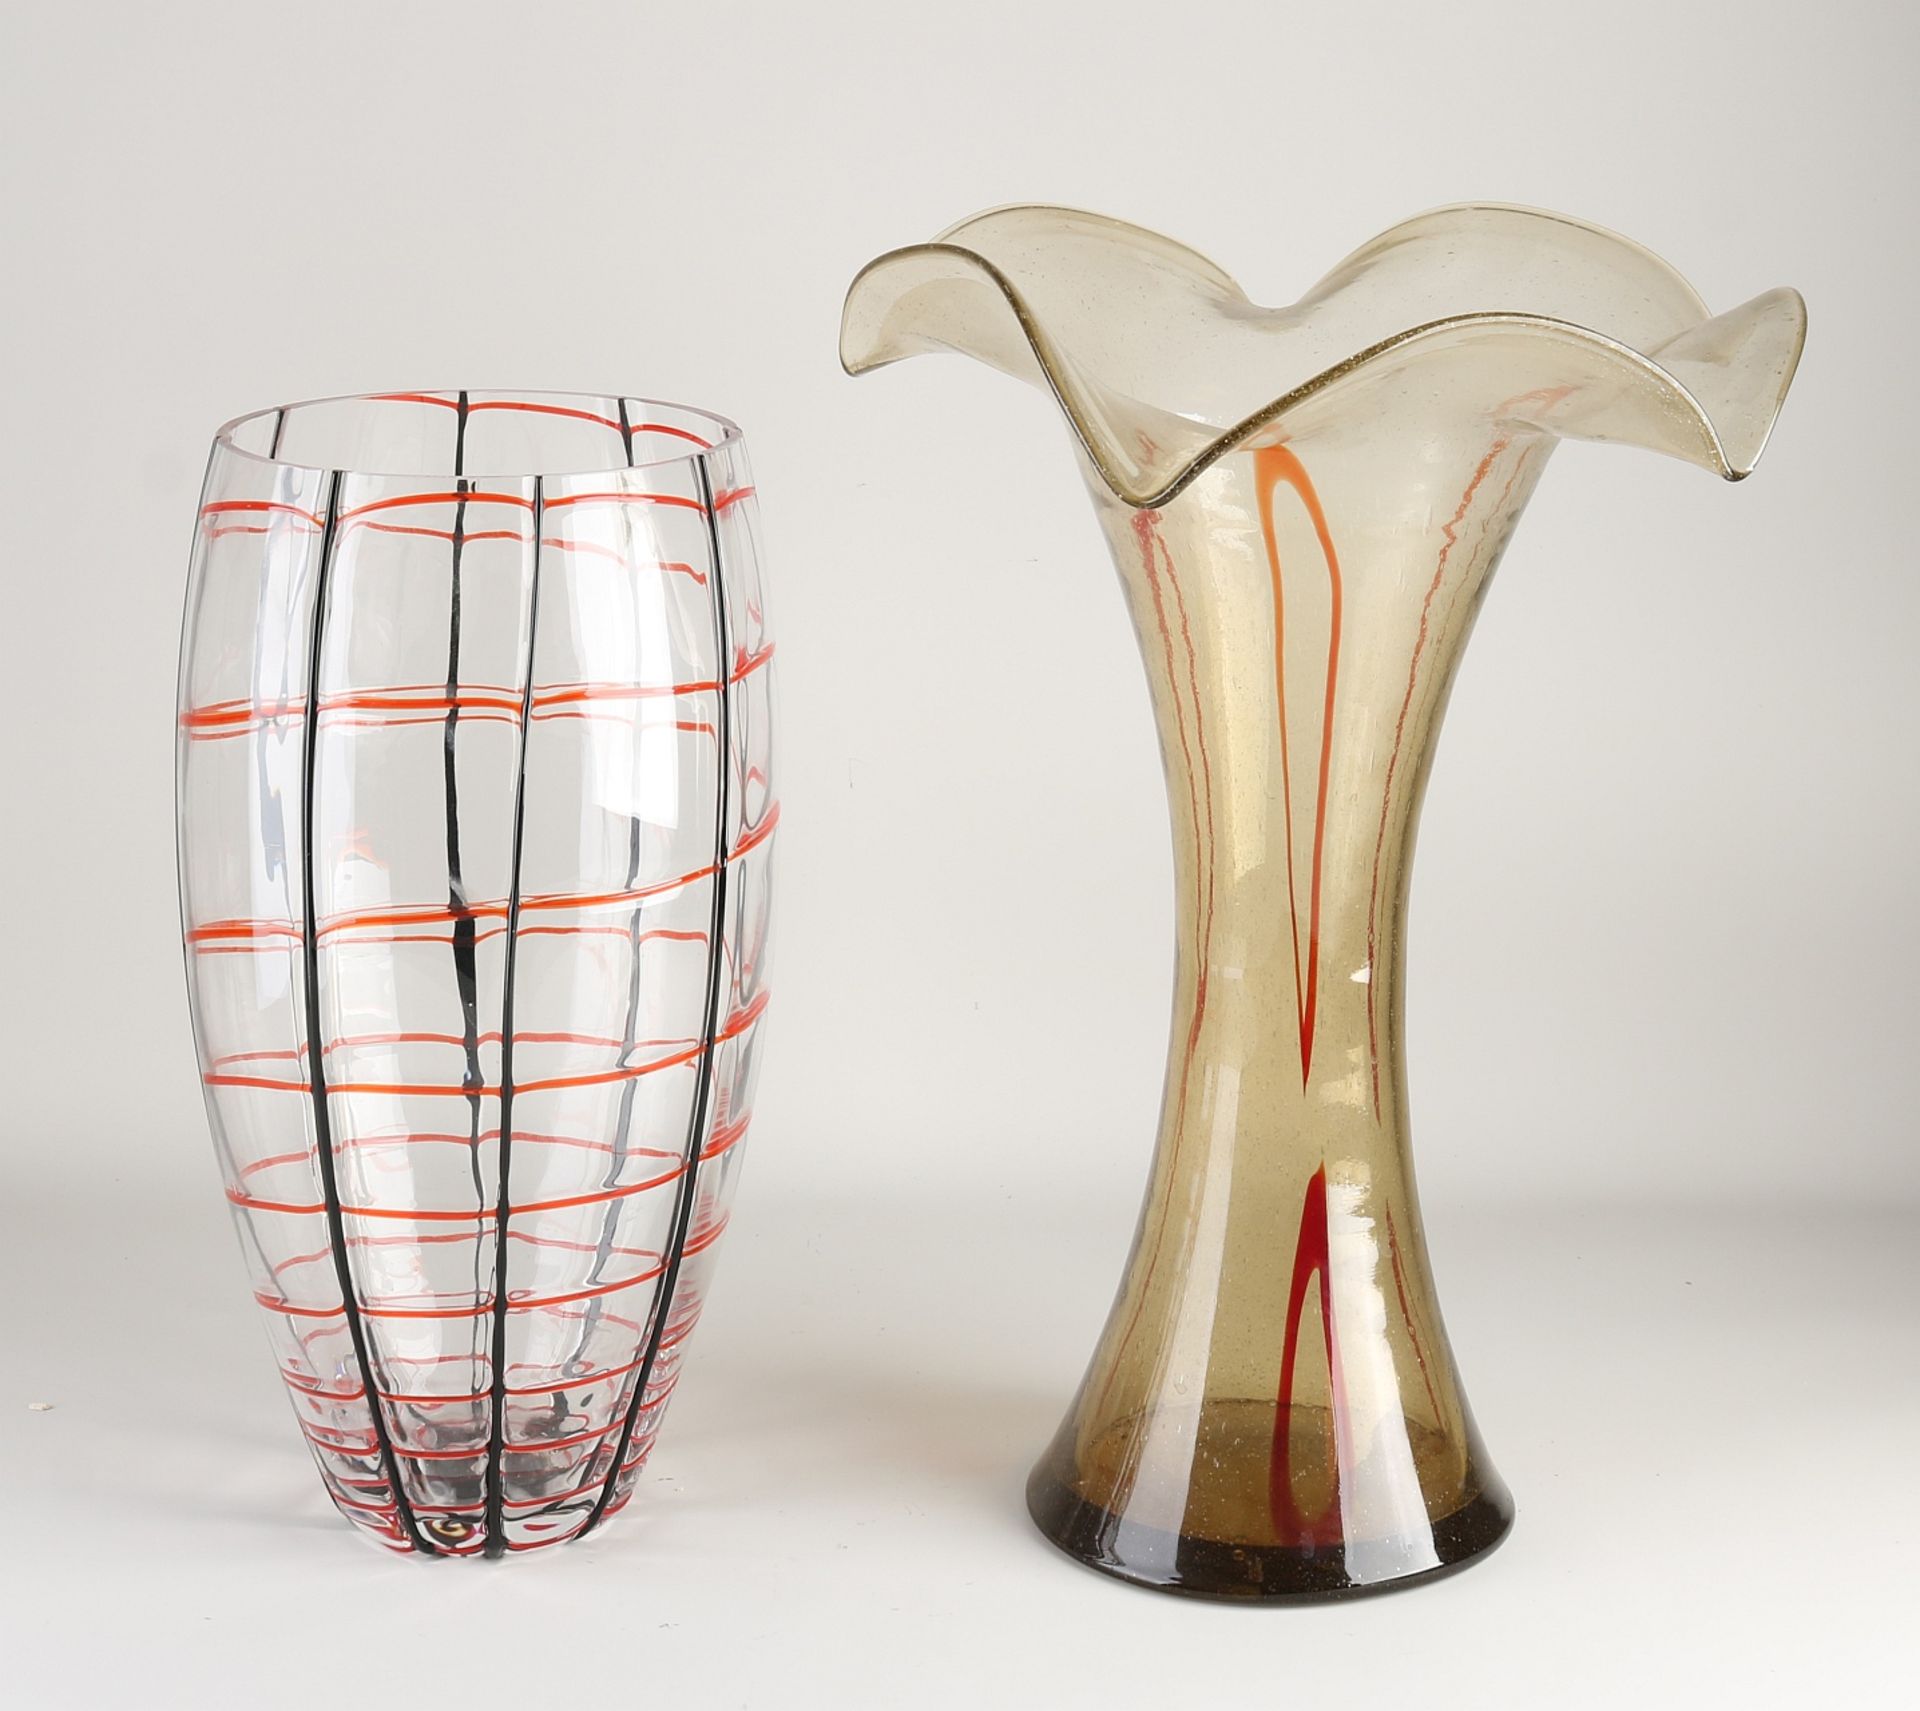 Two mouth-blown vases